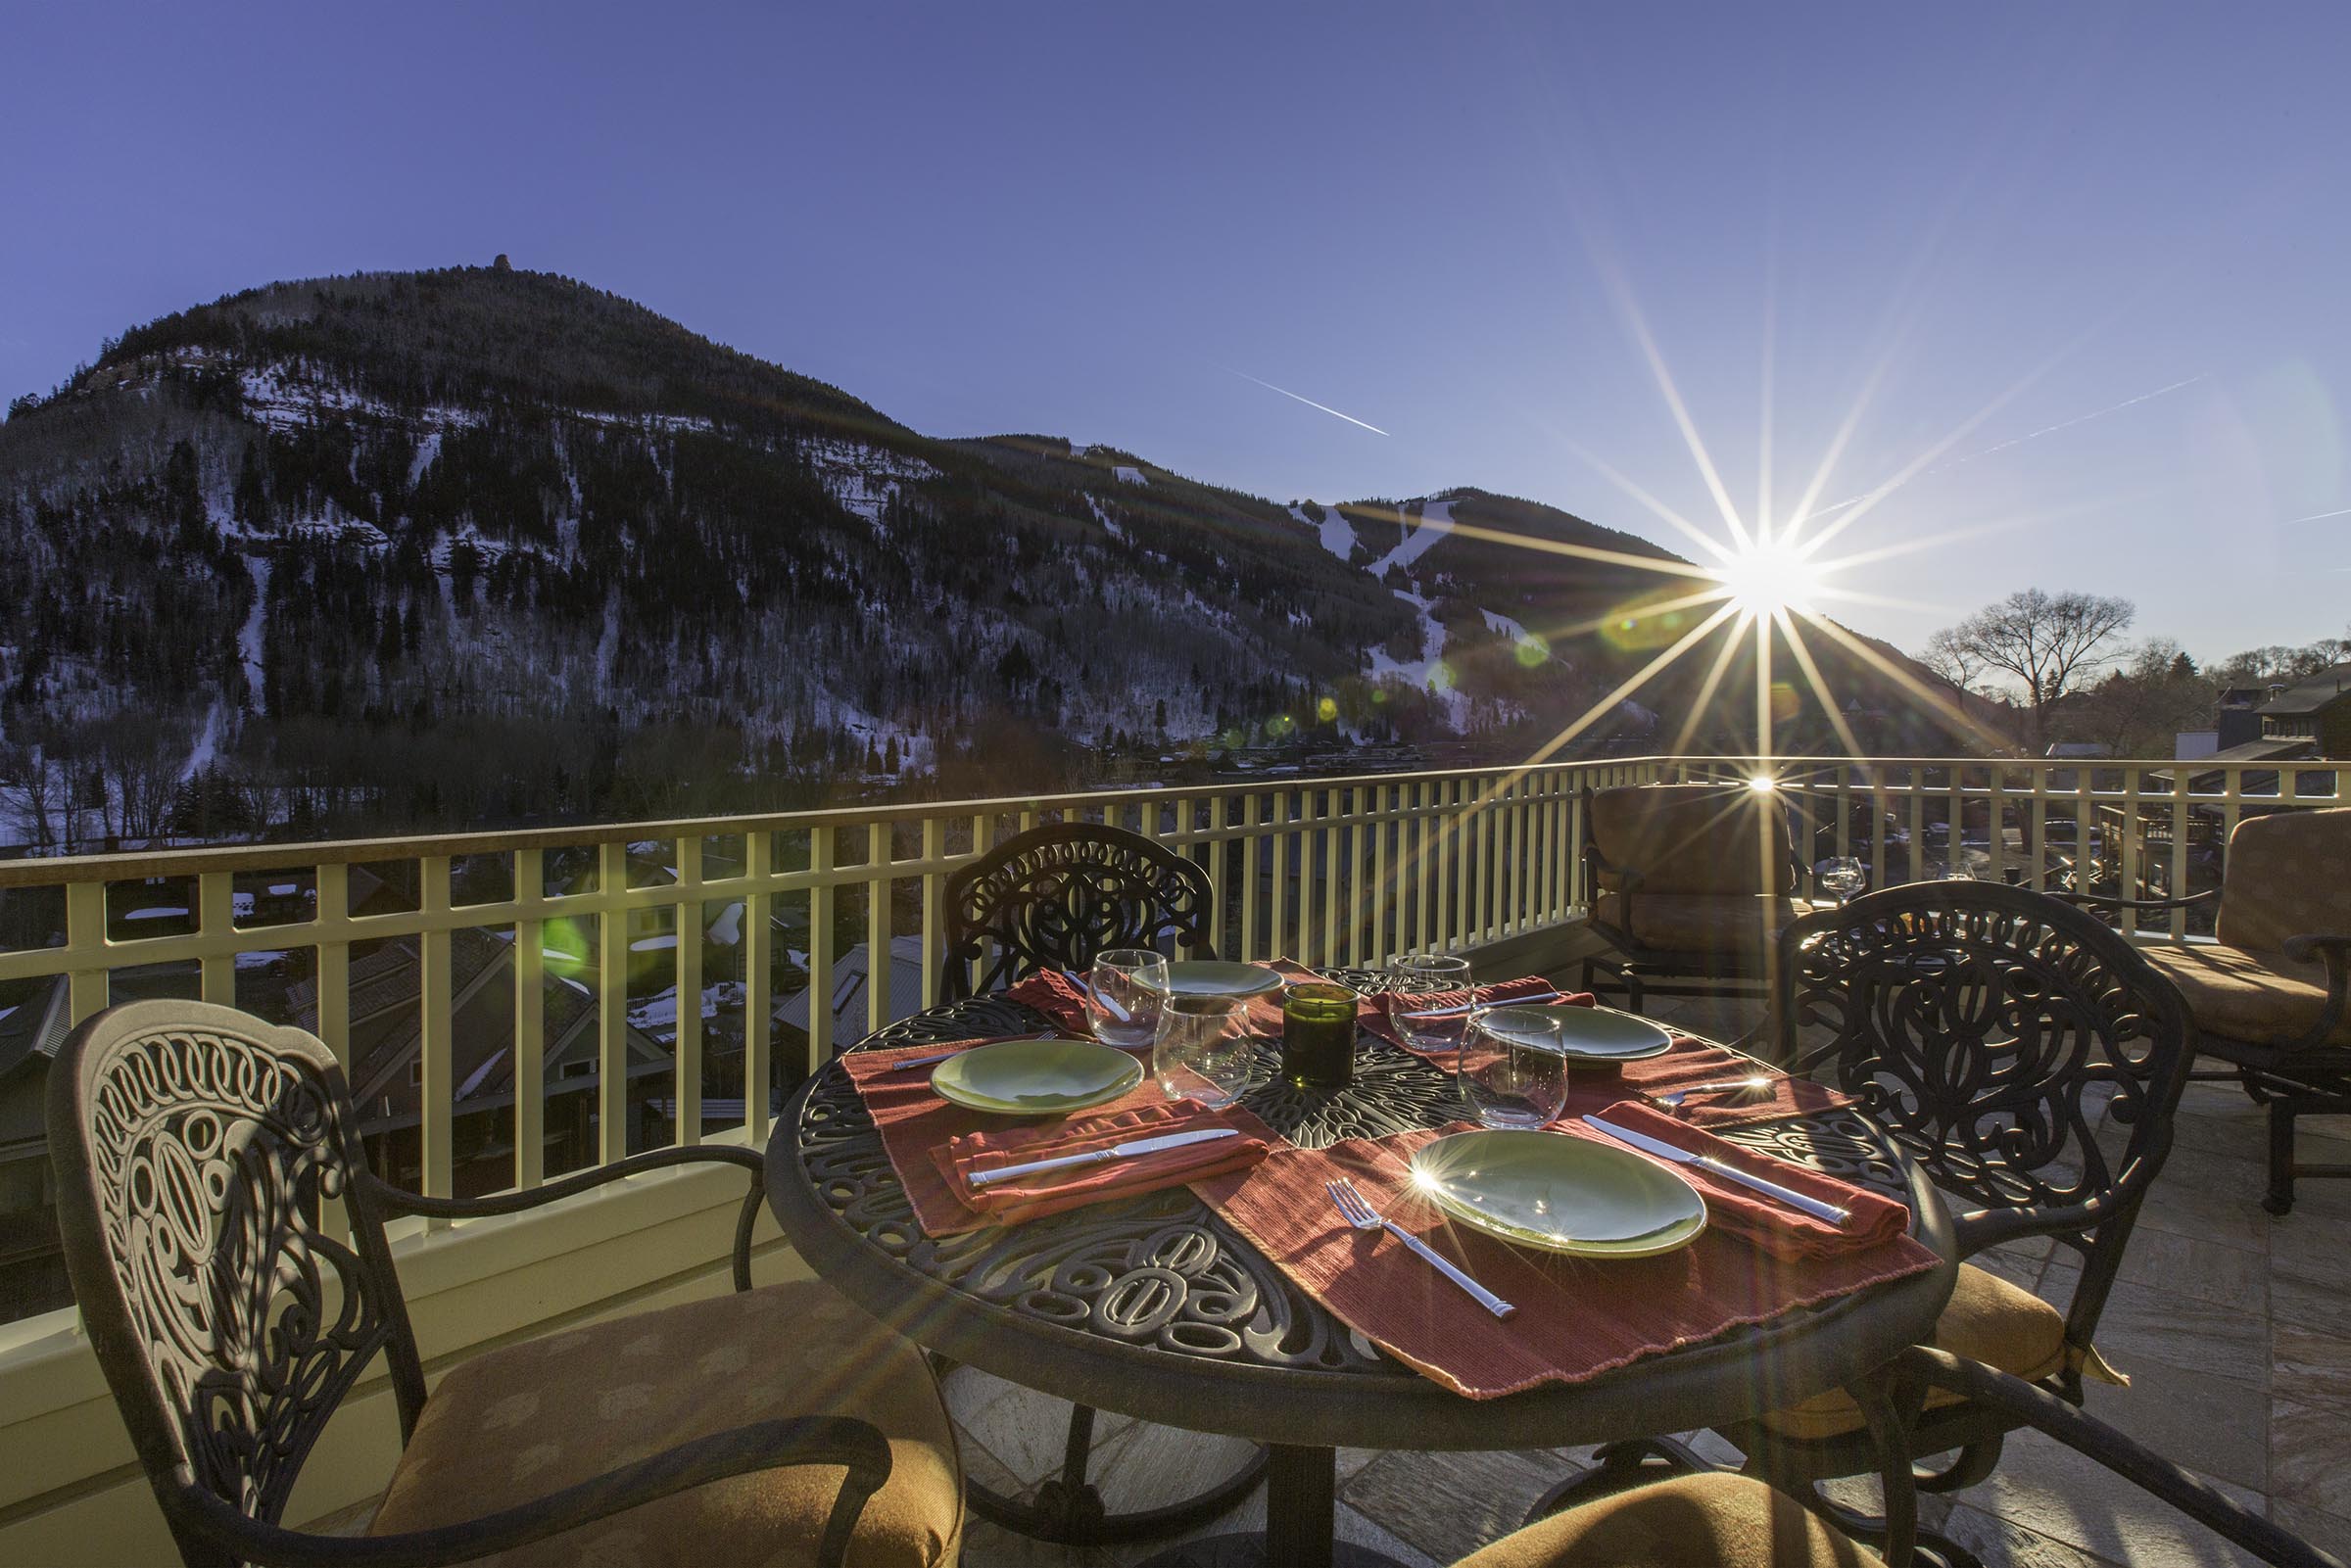  INVEST IN YOUR LIFESTYLE TELLURIDE, CO   SEARCH FOR YOUR DREAM PROPERTY  